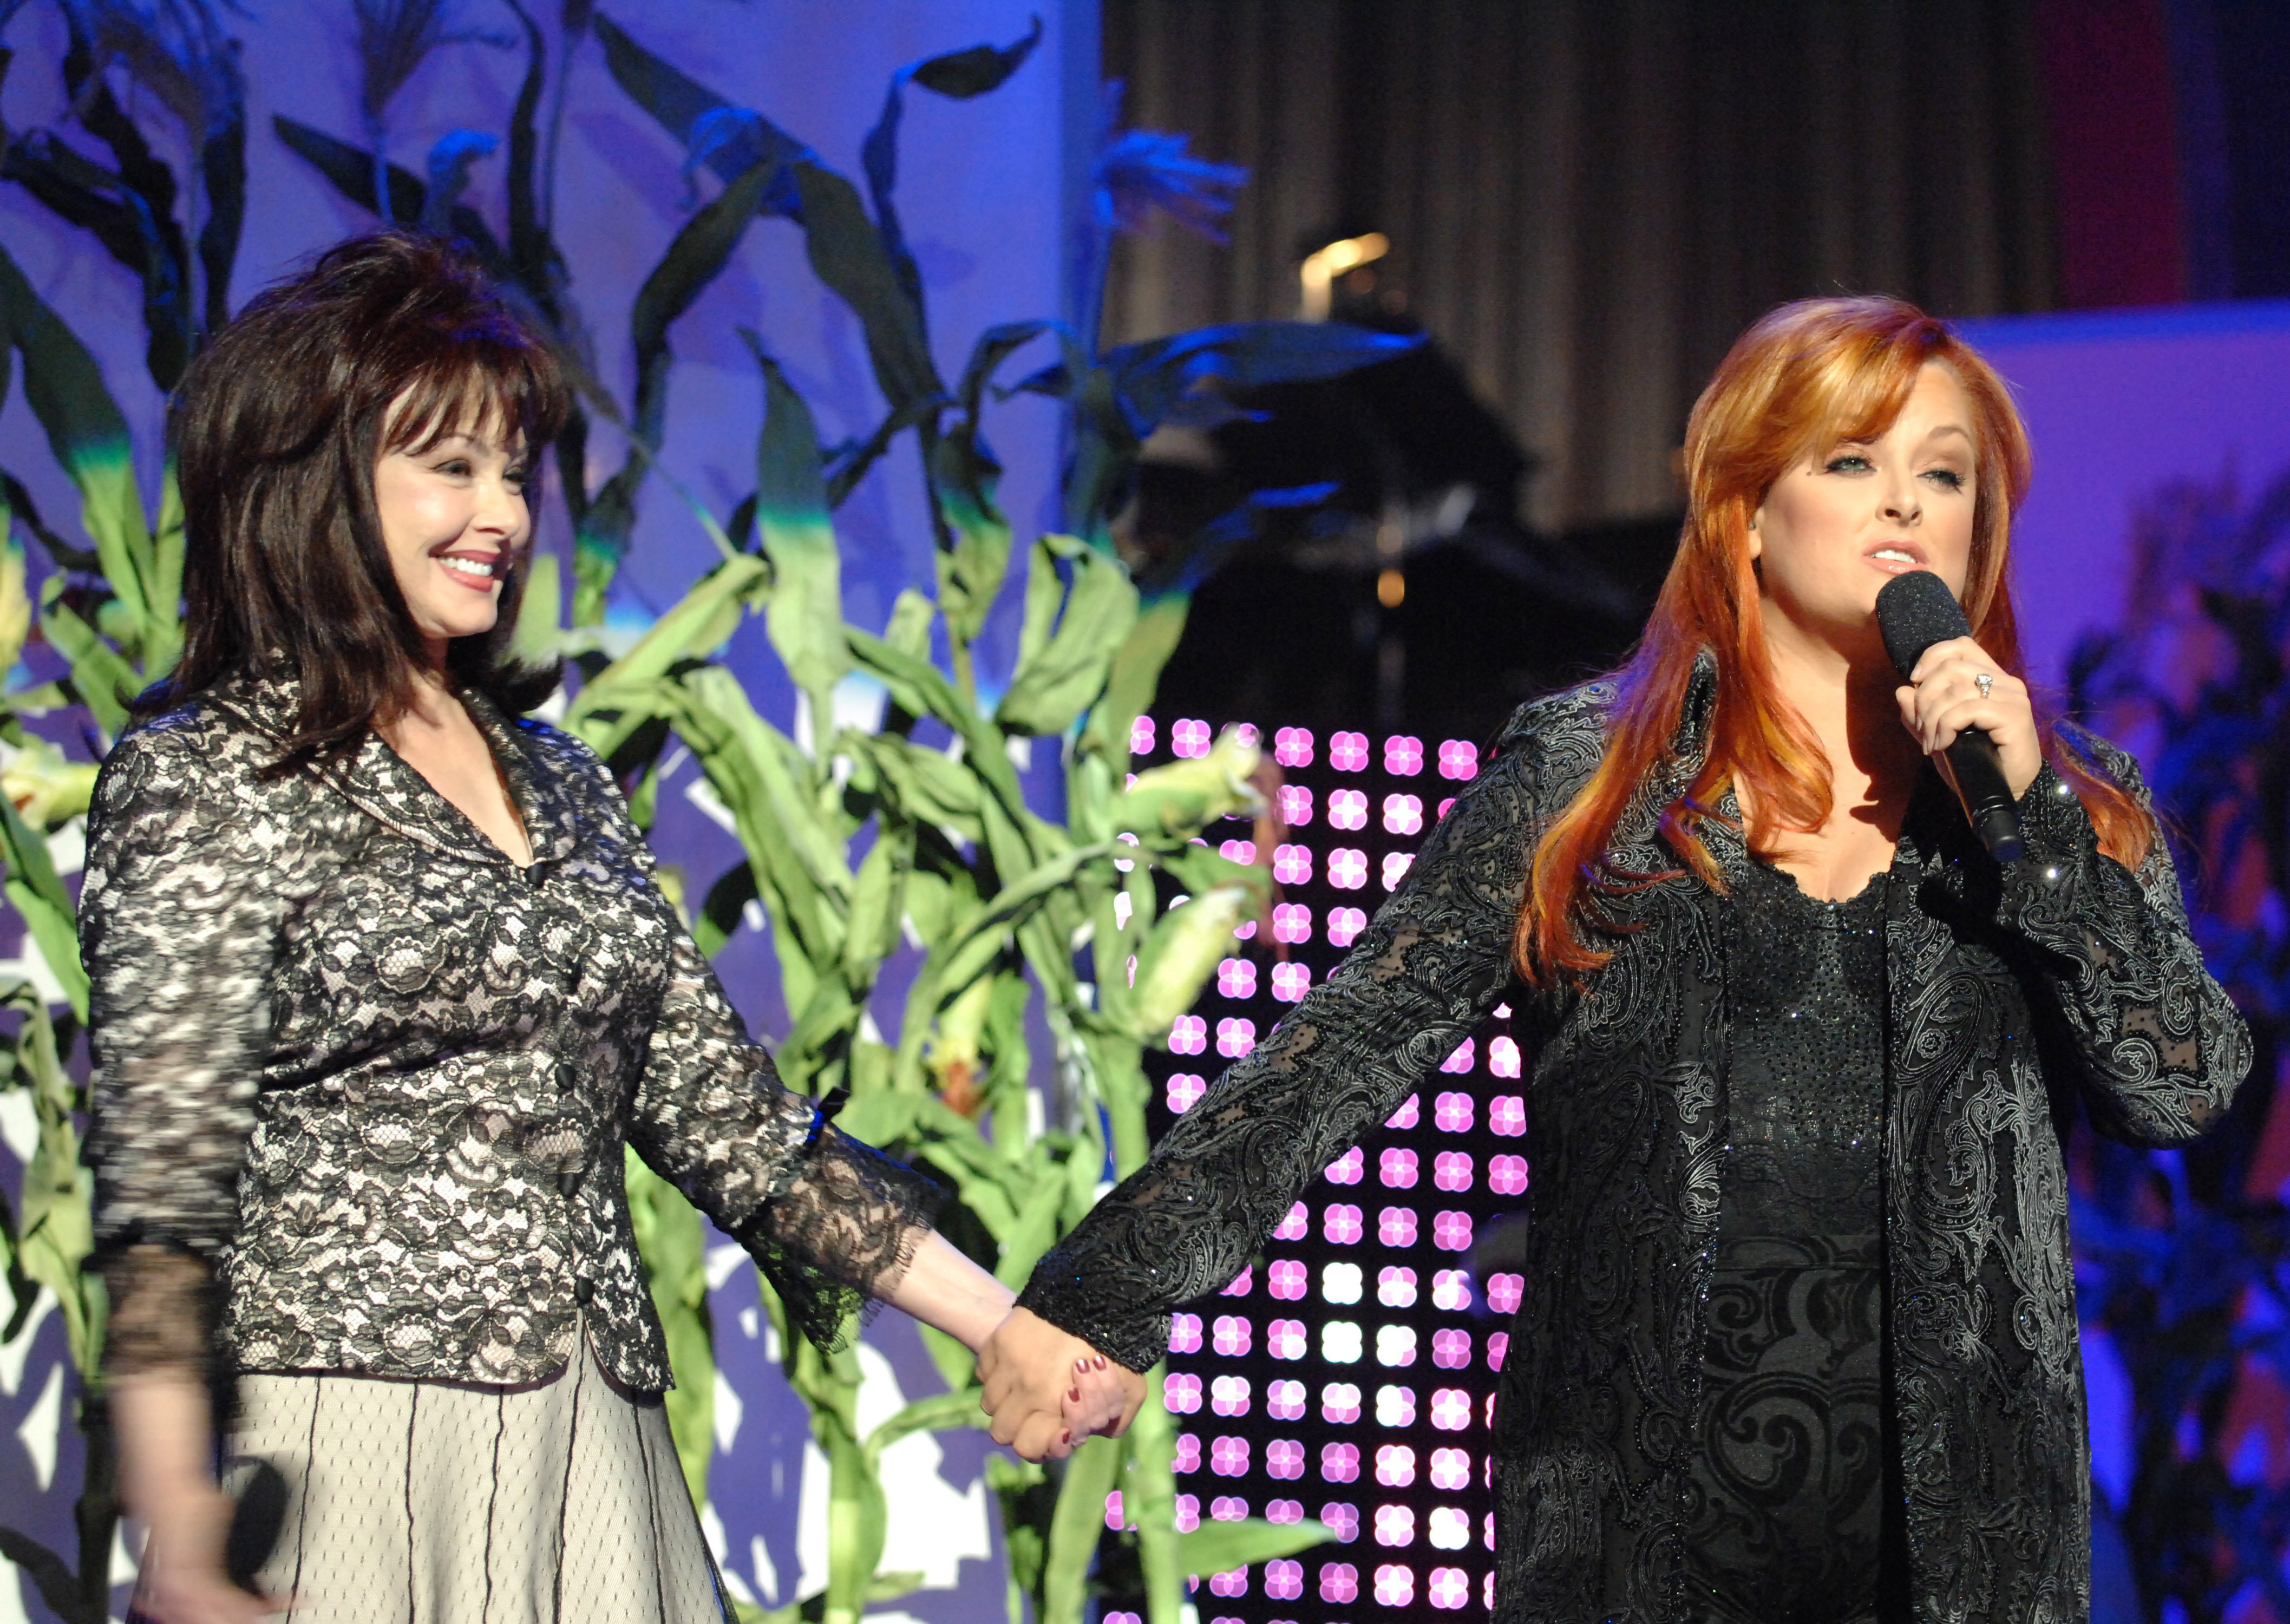 Naomi and Wynonna Judd perform "Mama, He's Crazy" at the 5th Annual TV Land Awards on April 14, 2007. | Source: Lester Cohen/WireImage/Getty Images